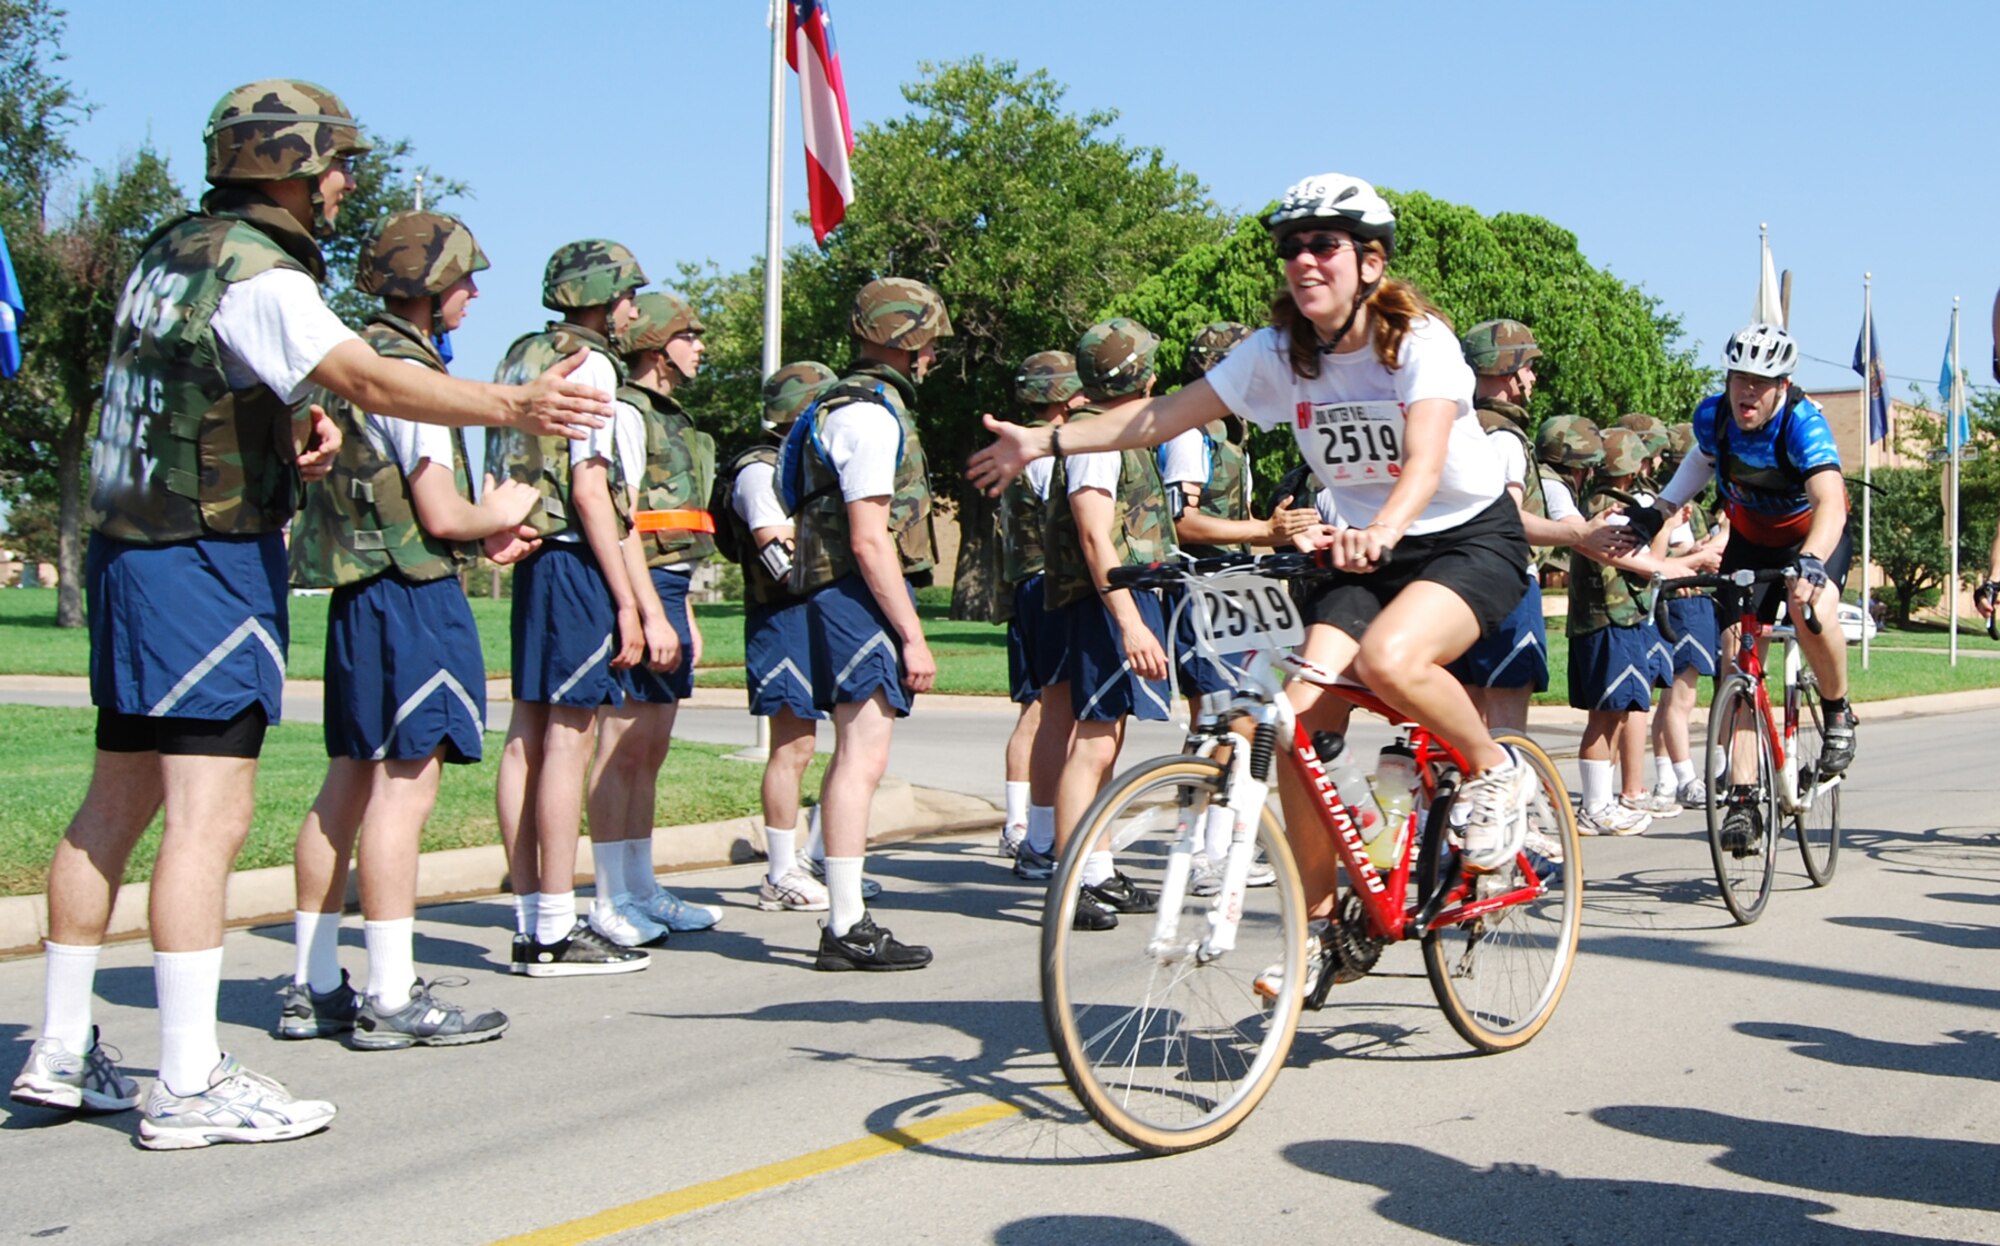 Members of the 363rd Training Squadron encourage and cheer participants in the 27th Annual Hotter'N Hell Hundred race as they pass through Sheppard Air Force Base Aug. 25. Over 12,000 cyclists participated in the race. (U.S. Air Force photo/Airman 1st Class Candy Miller)